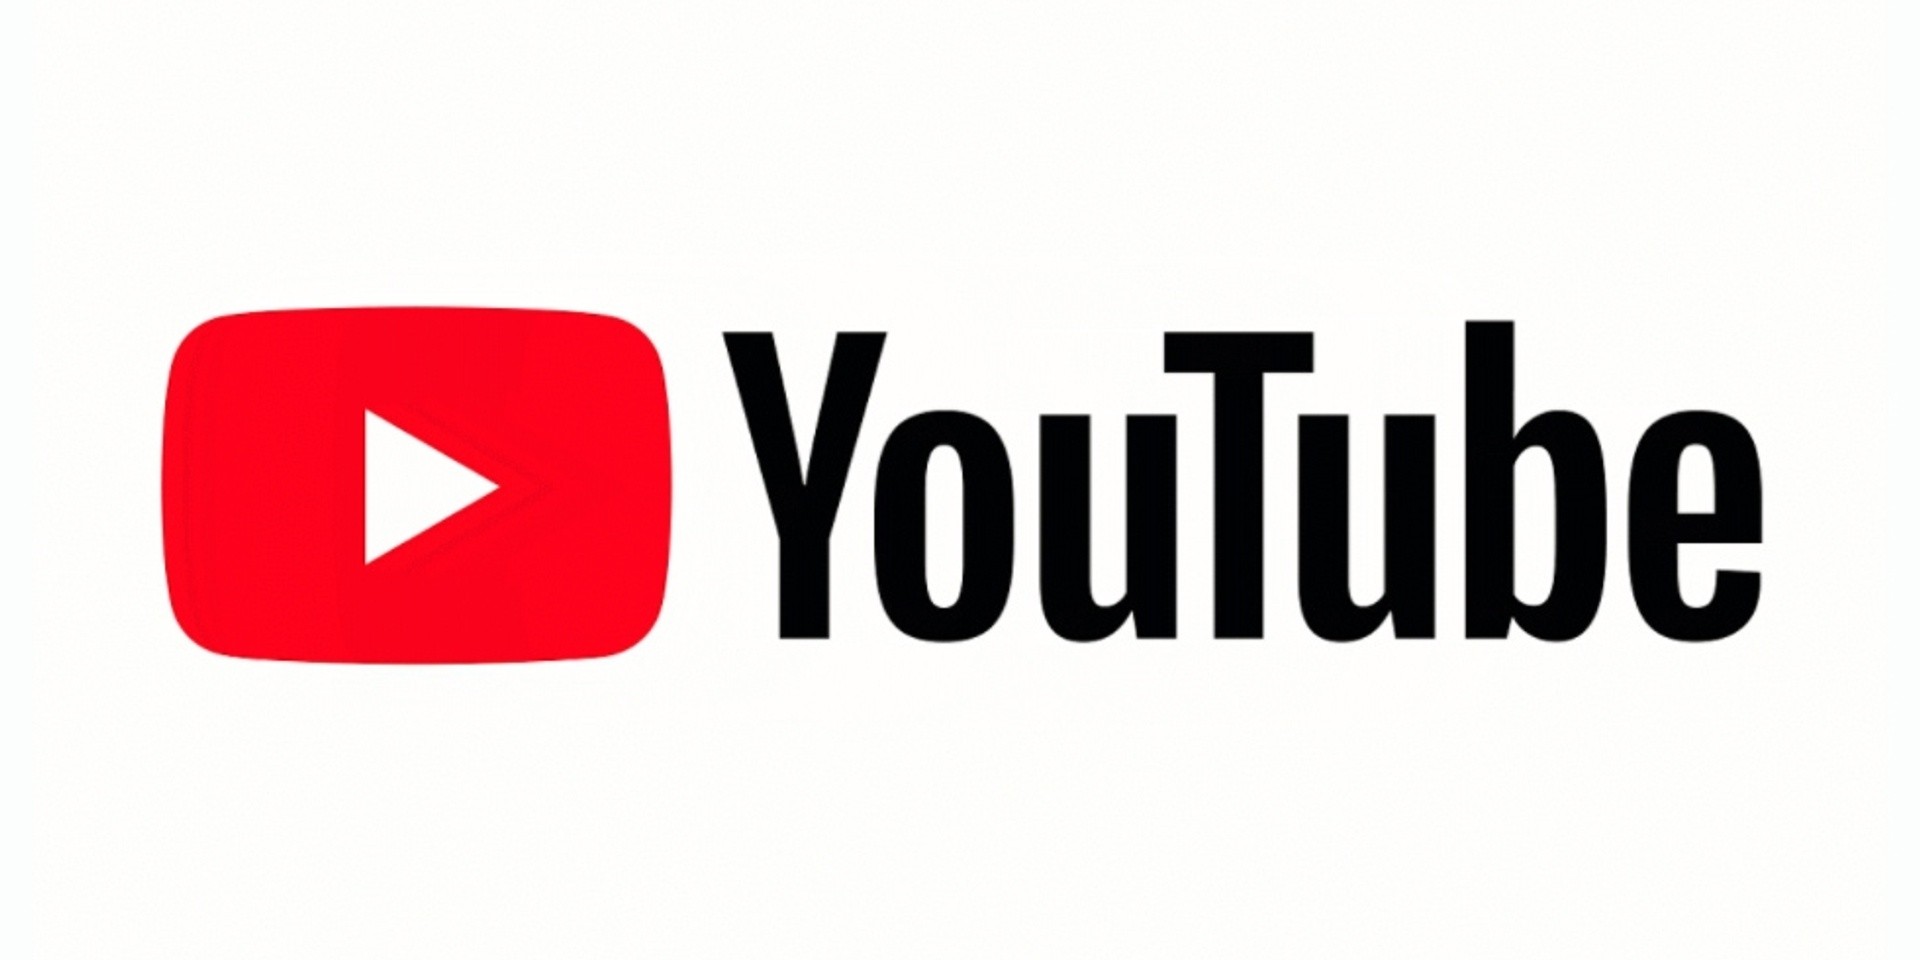 World's largest YouTube stream-ripping site has shut down